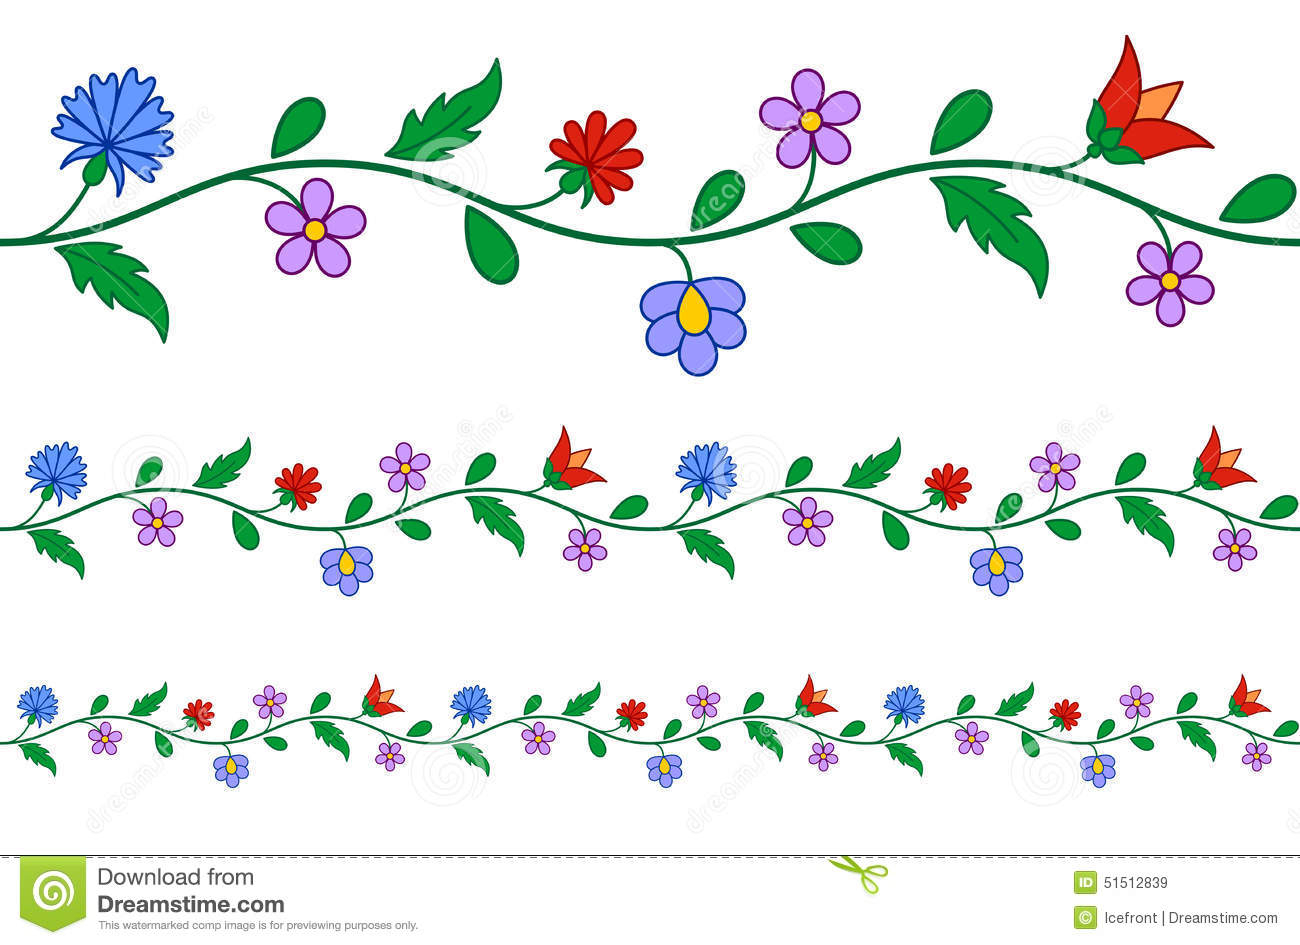 Hungarian Embroidery Patterns 18 Images Of Hungarian Leaf Template Unemeuf